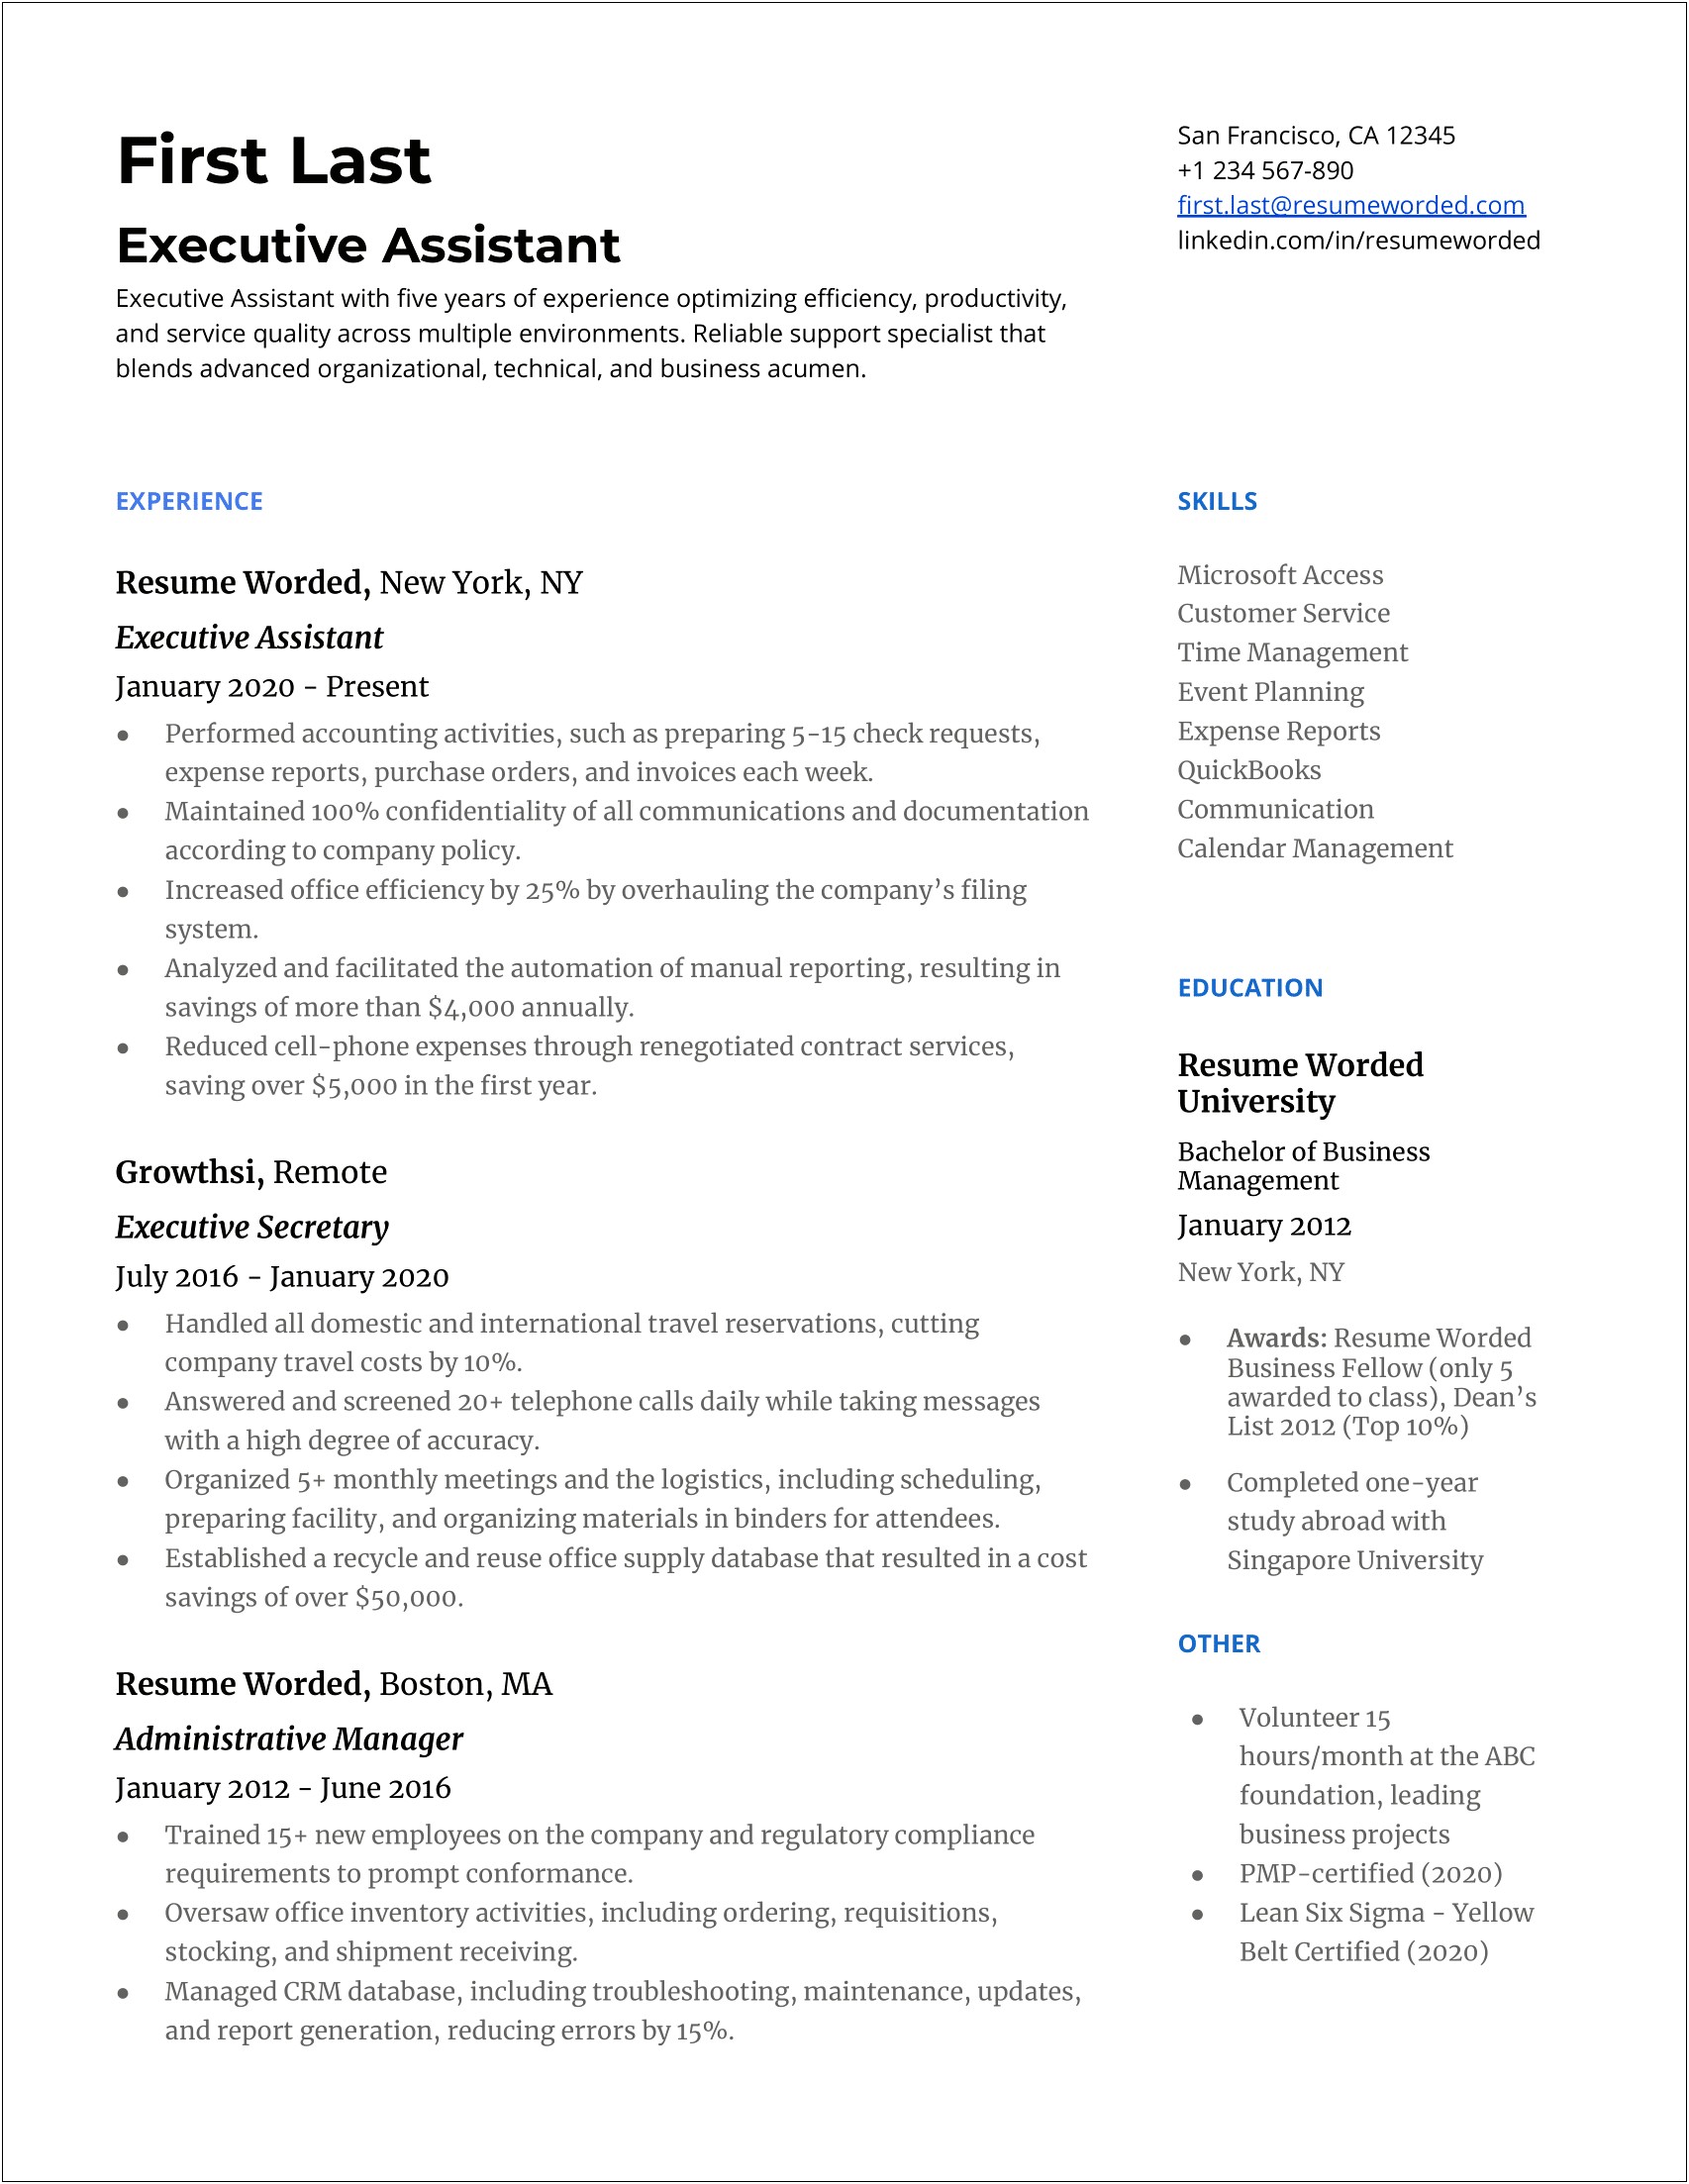 Resume Explaining Working In A High Stress Environment